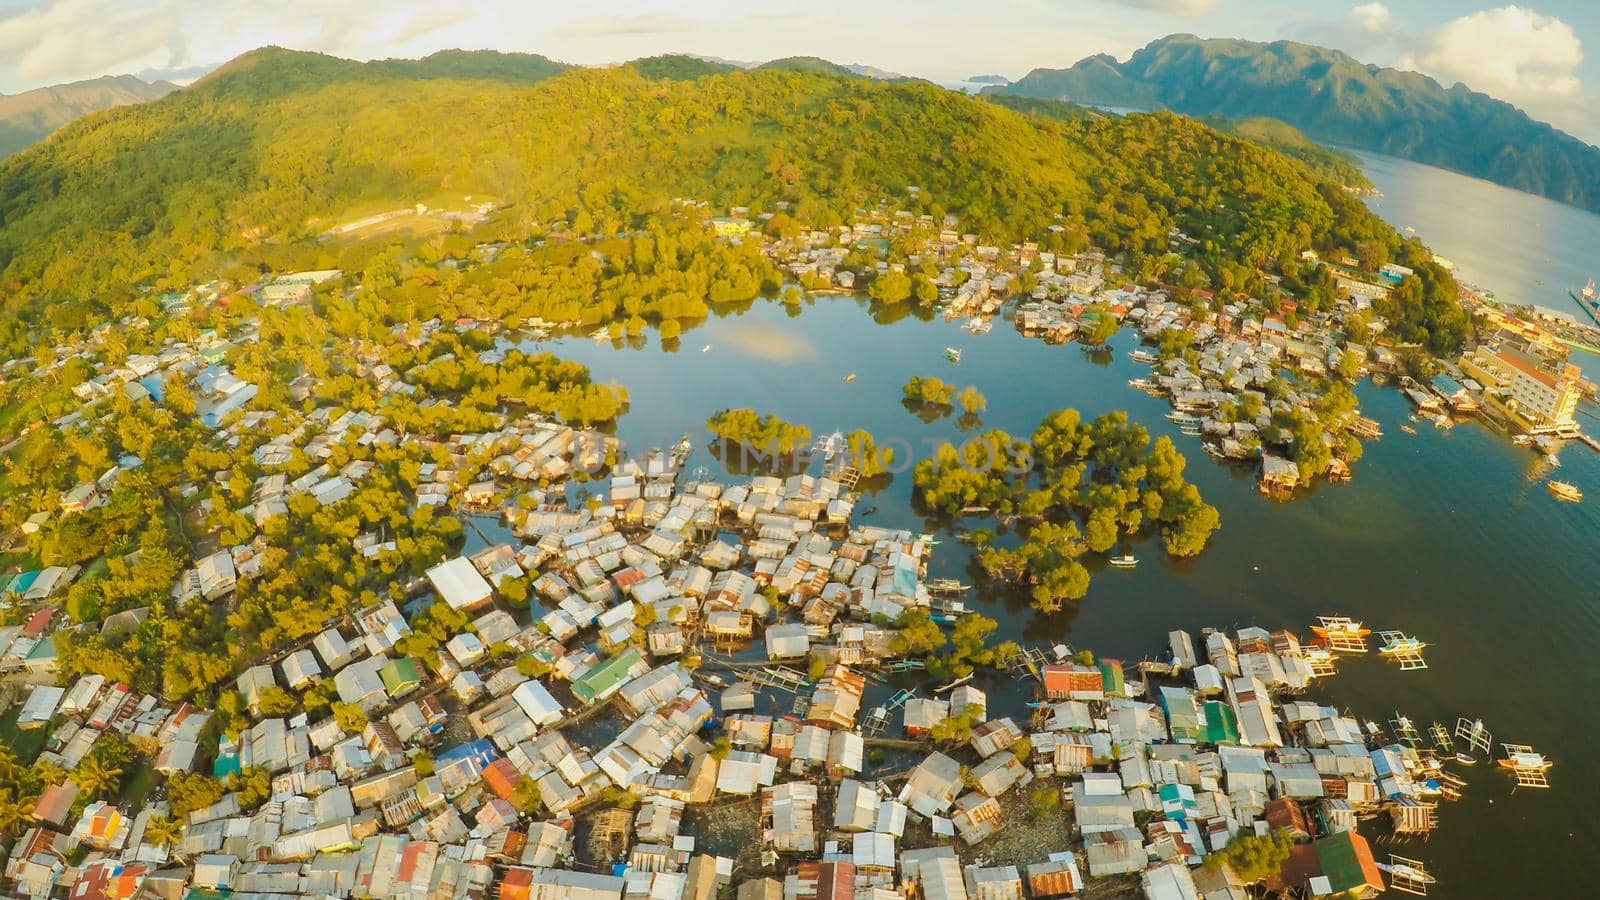 Aerial view Coron city with slums and poor district. Palawan. Busuanga island. Evening time and sunset. Fisheye view